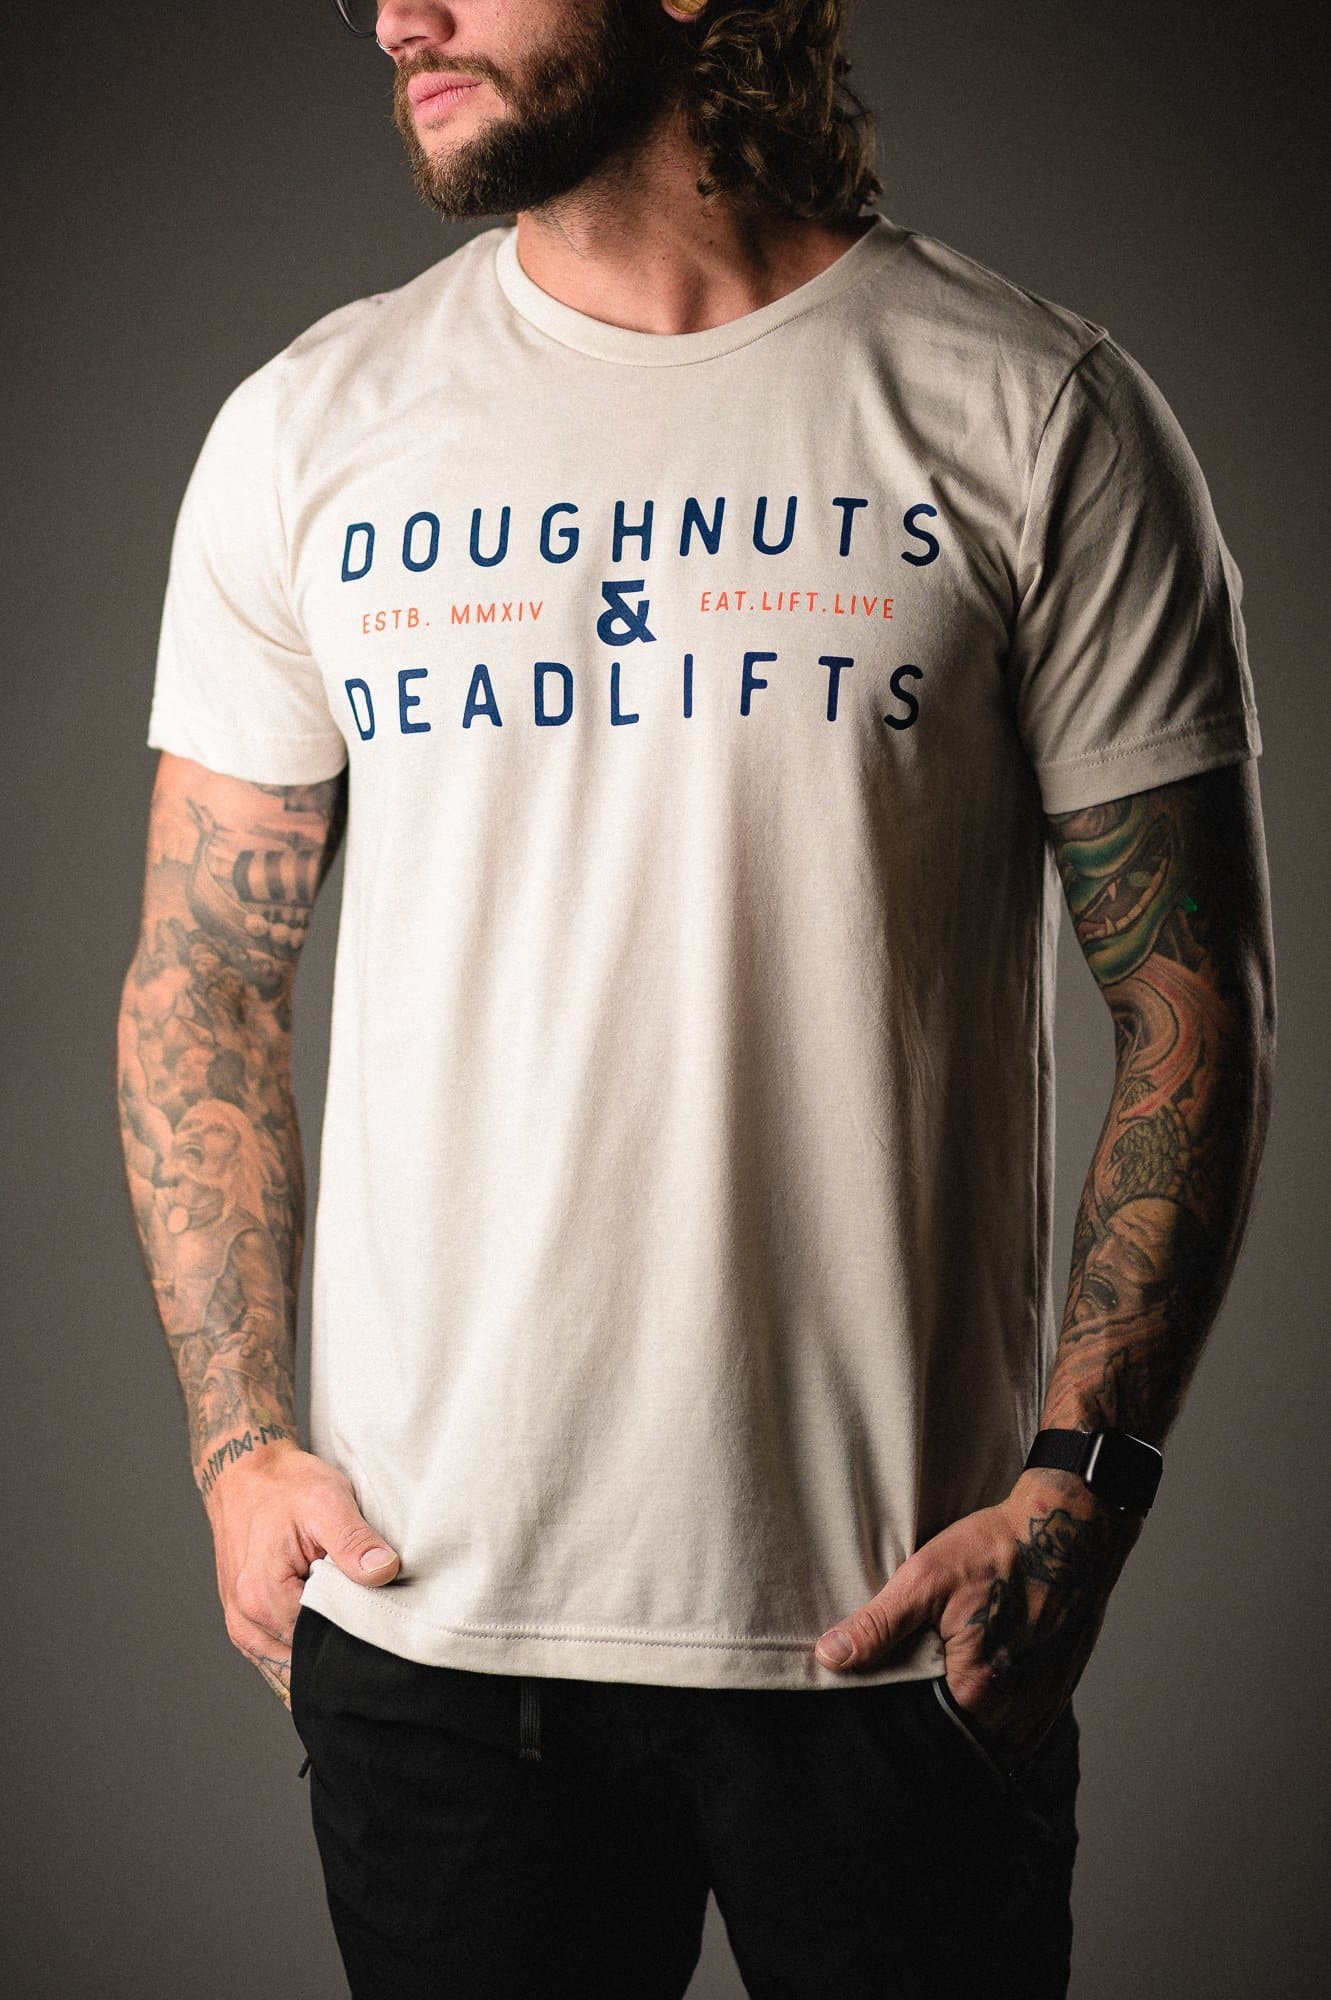 Doughnuts & Deadlifts SUMMER CAMP Tee (Toasted Mallow) - 9 for 9